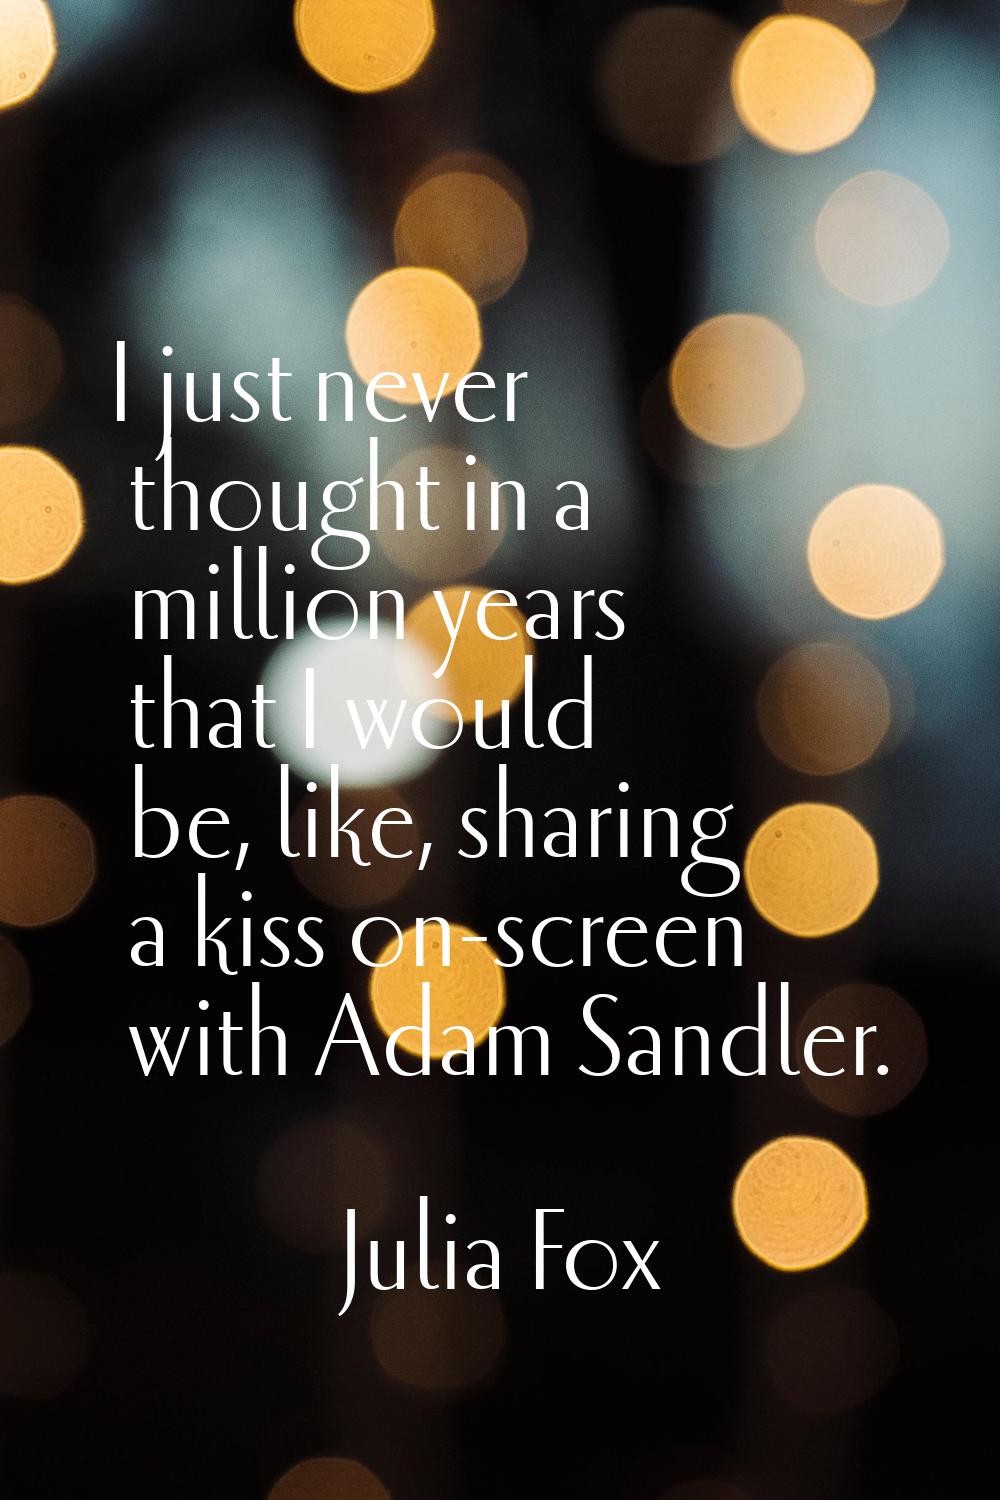 I just never thought in a million years that I would be, like, sharing a kiss on-screen with Adam S